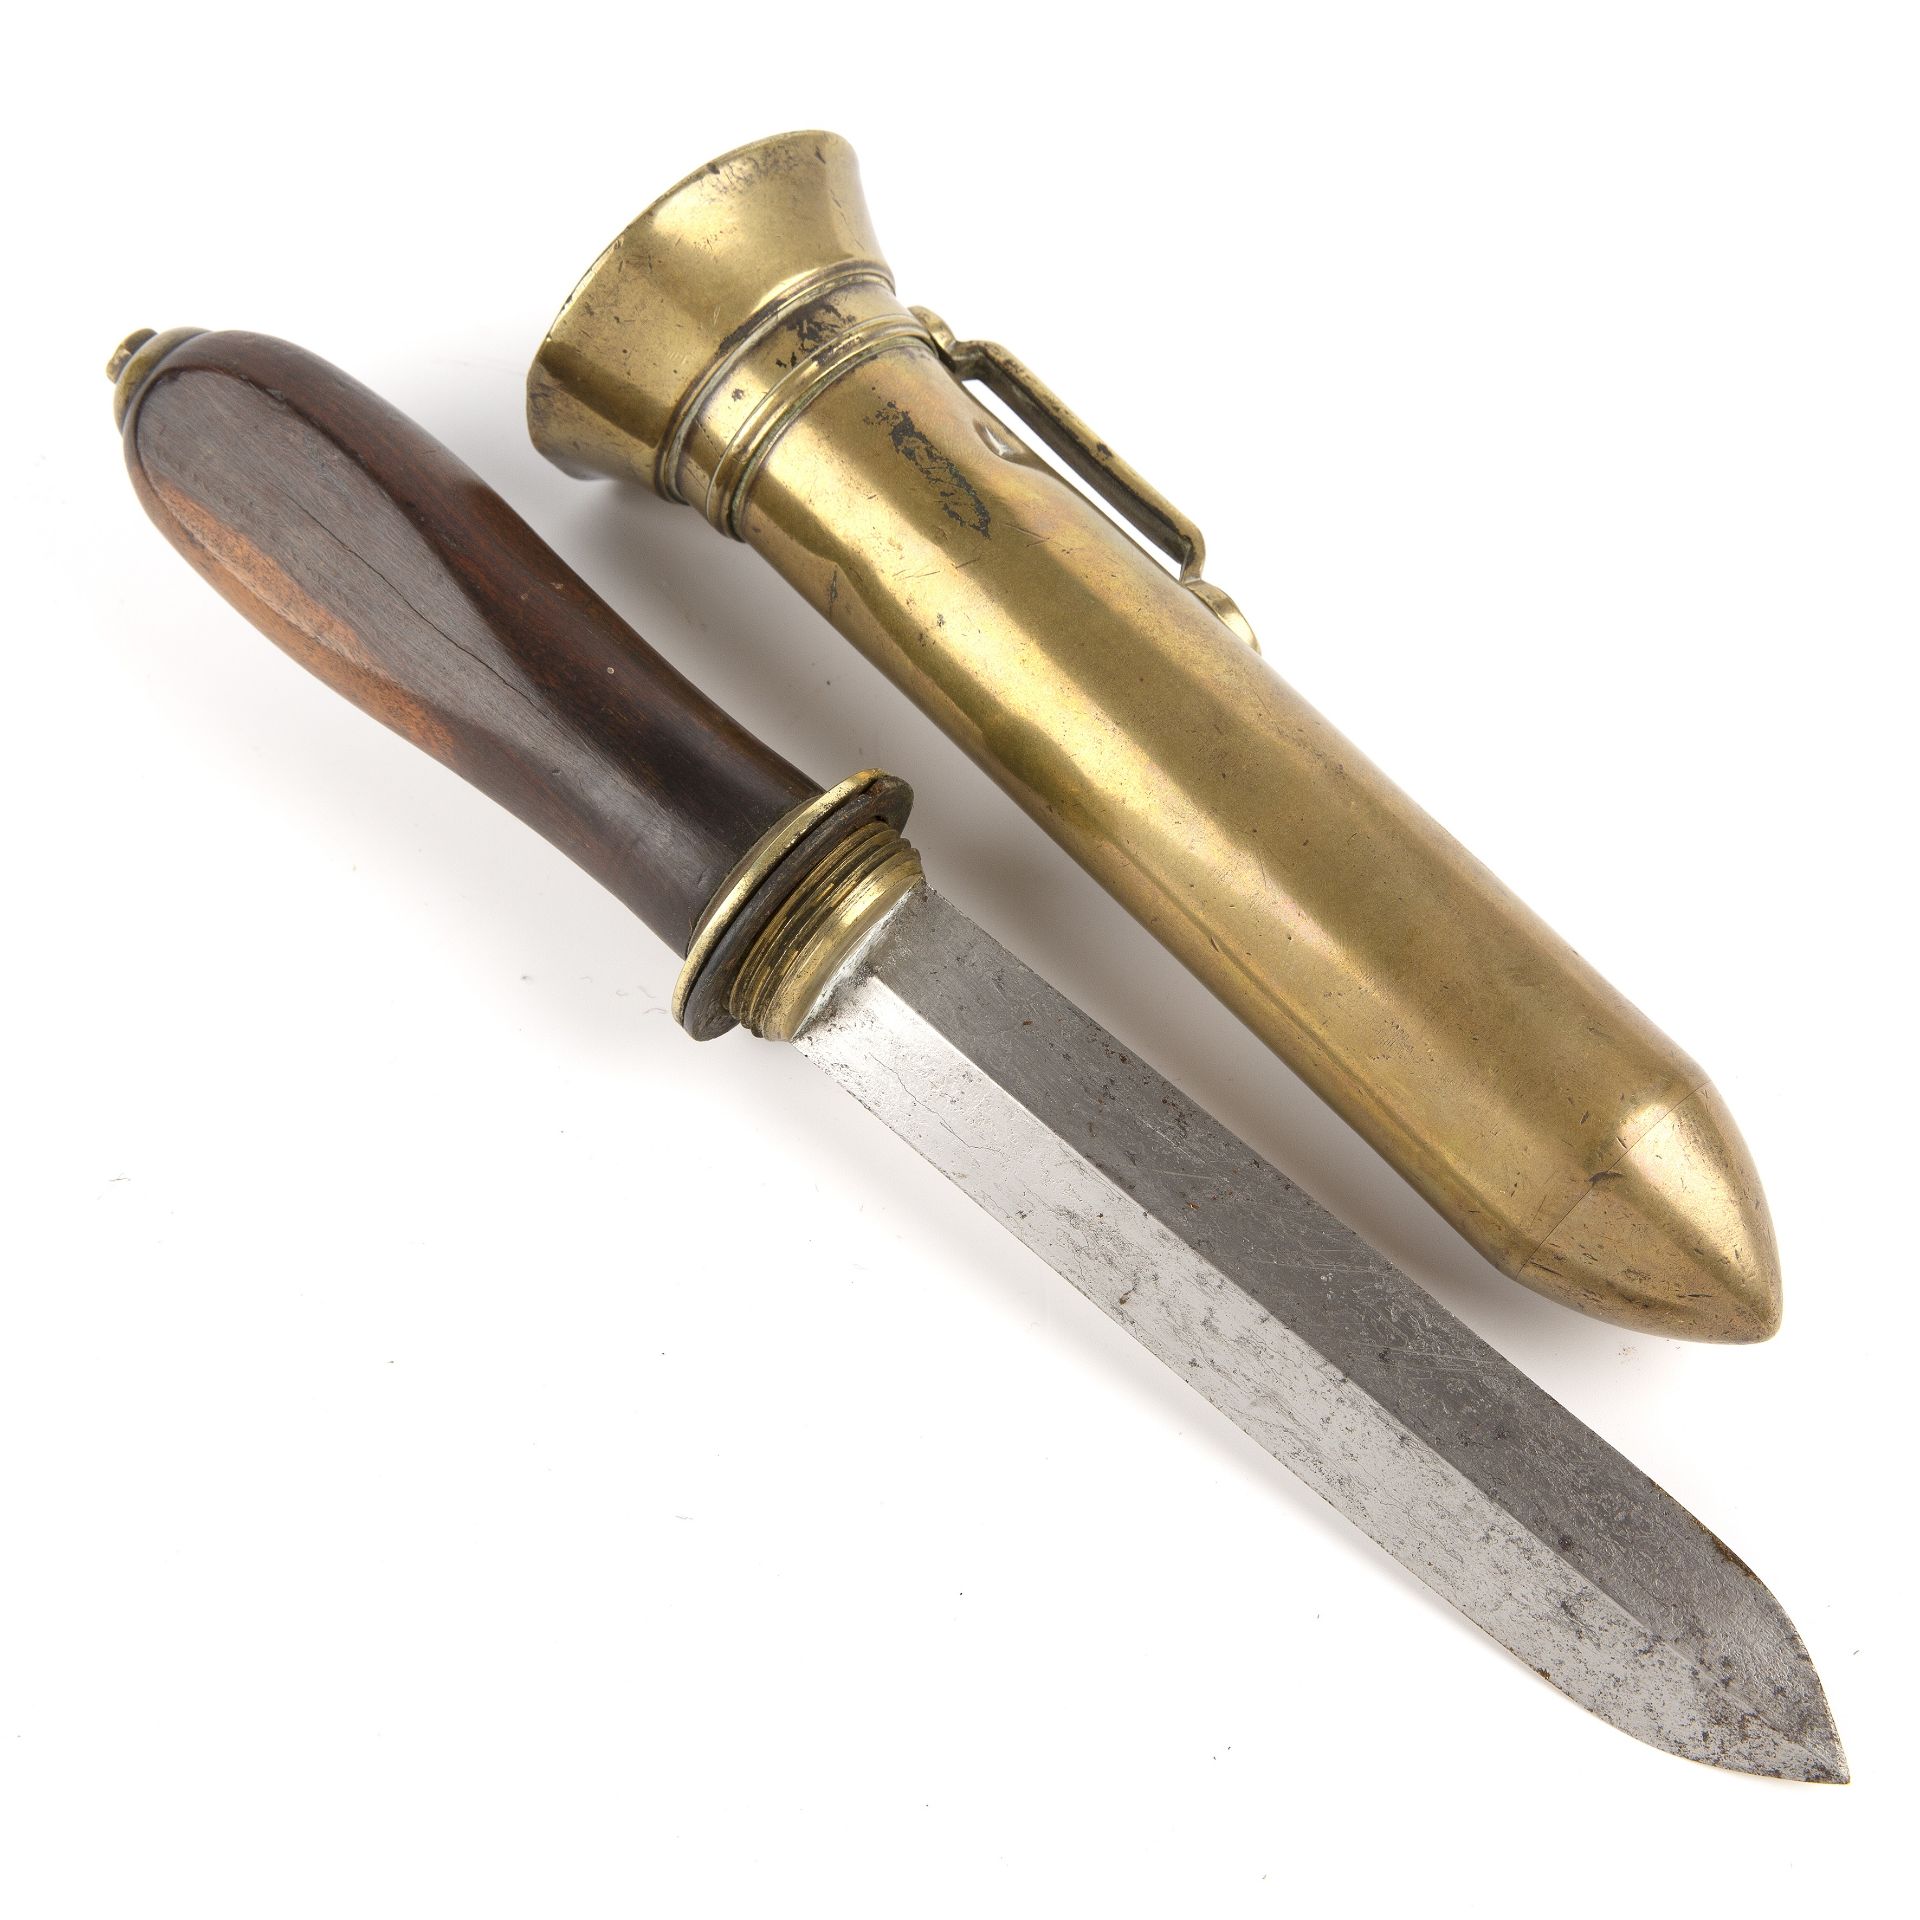 An early 20th century Siebe, Gorman and Co divers knife with a hardwood grip and original brass